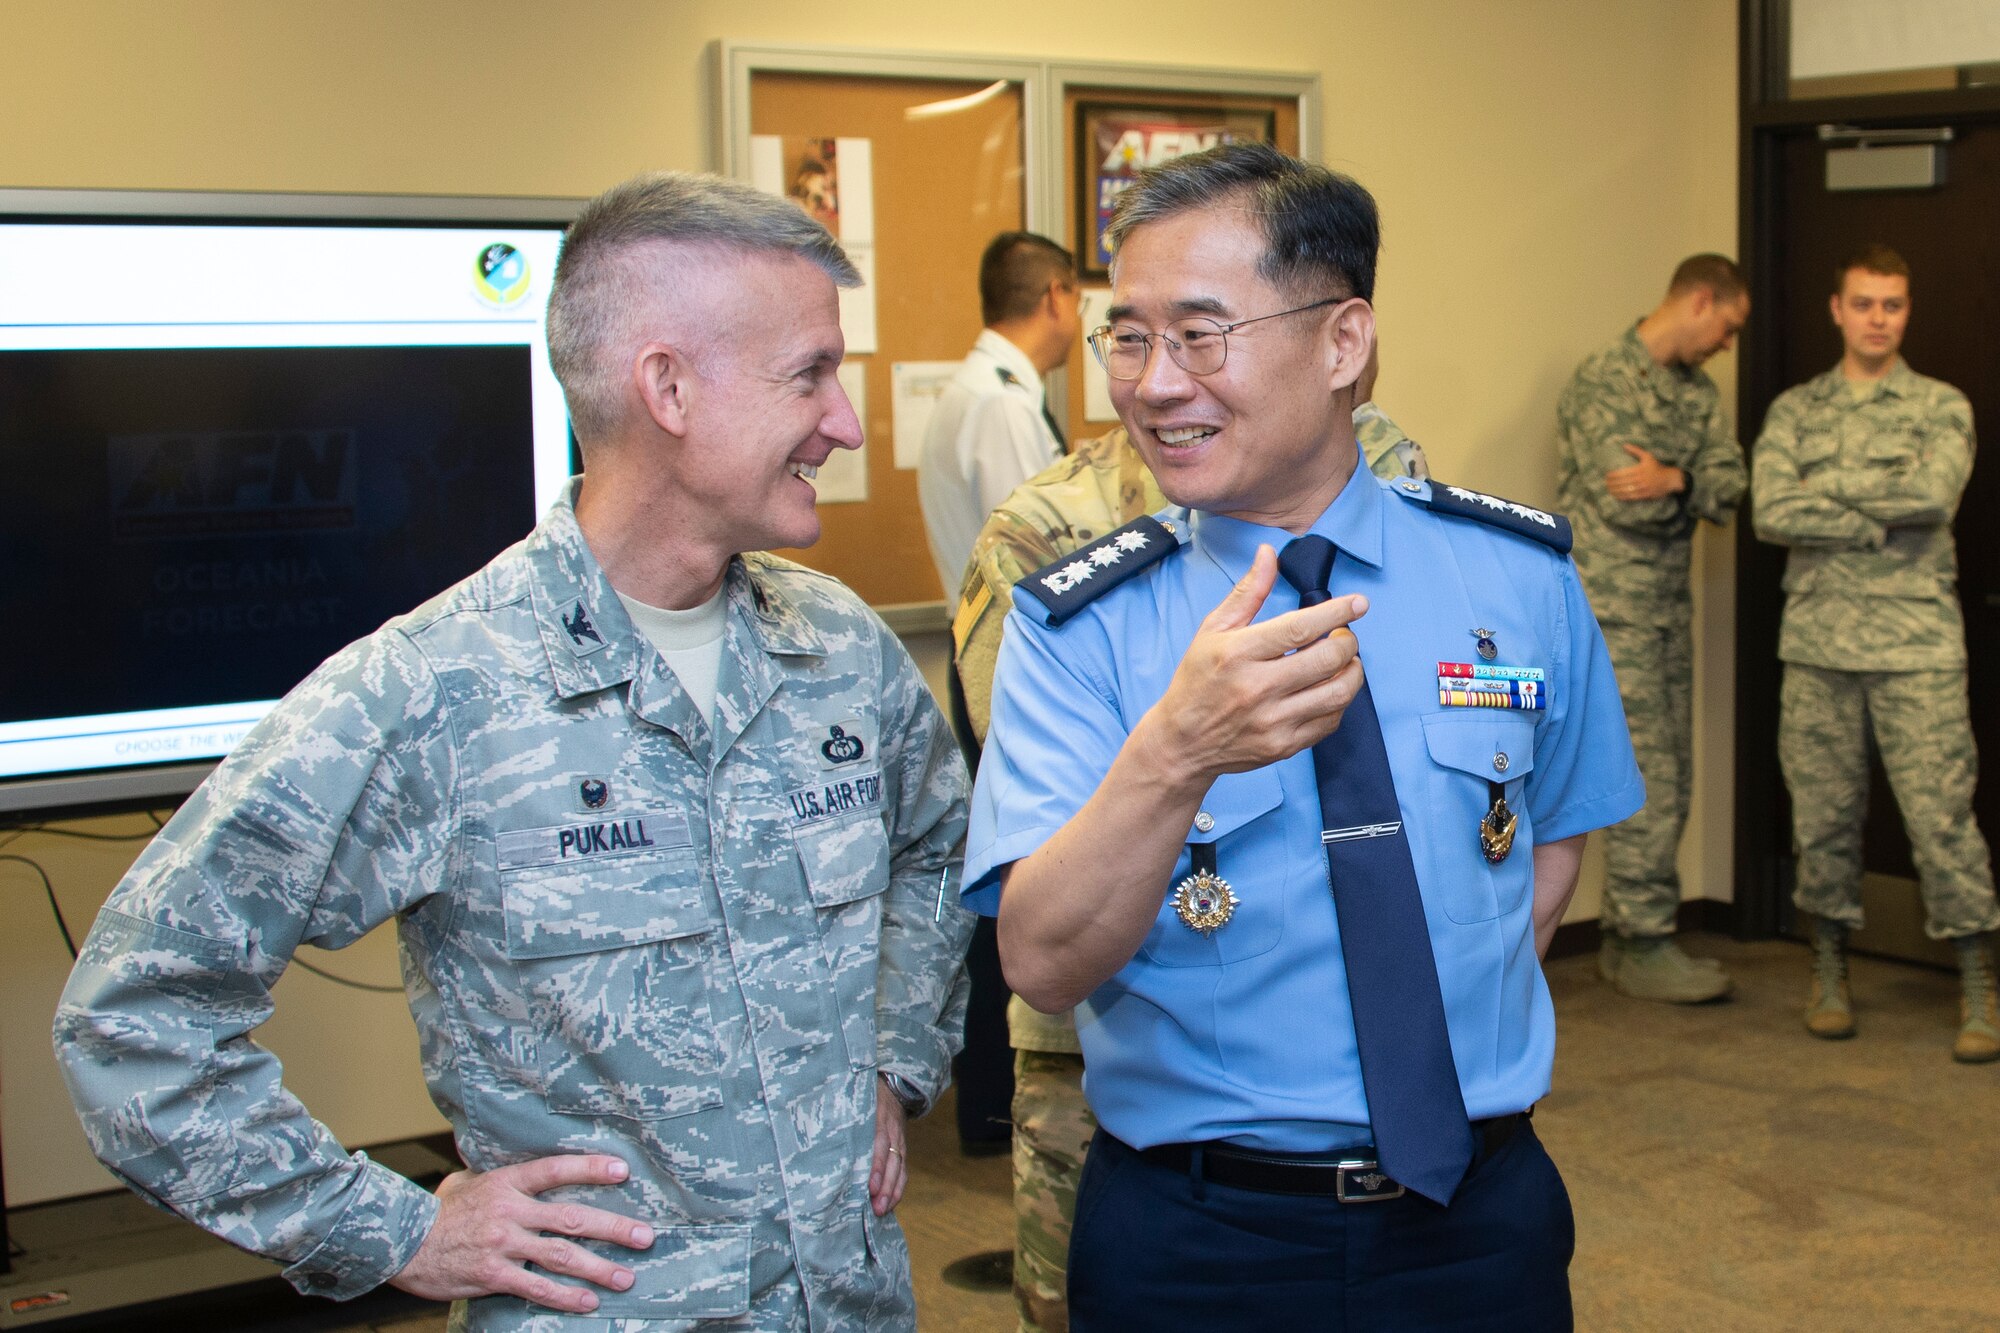 Col. Brian Pukall, left, 557th Weather Wing commander, and Col. Kyun Do Ki, right, Republic of Korea Air Force Weather Wing commander, talk during a demonstration at the American Forces Network Weather Center at the 557th WW headquarters building, Offutt Air Force Base, Nebraska, June 20, 2019. The AFN Weather Center records daily weather forecasts for the AFN audience as well as Stars and Stripes readers around the world. (U.S. Air Force photo by Paul Shirk)